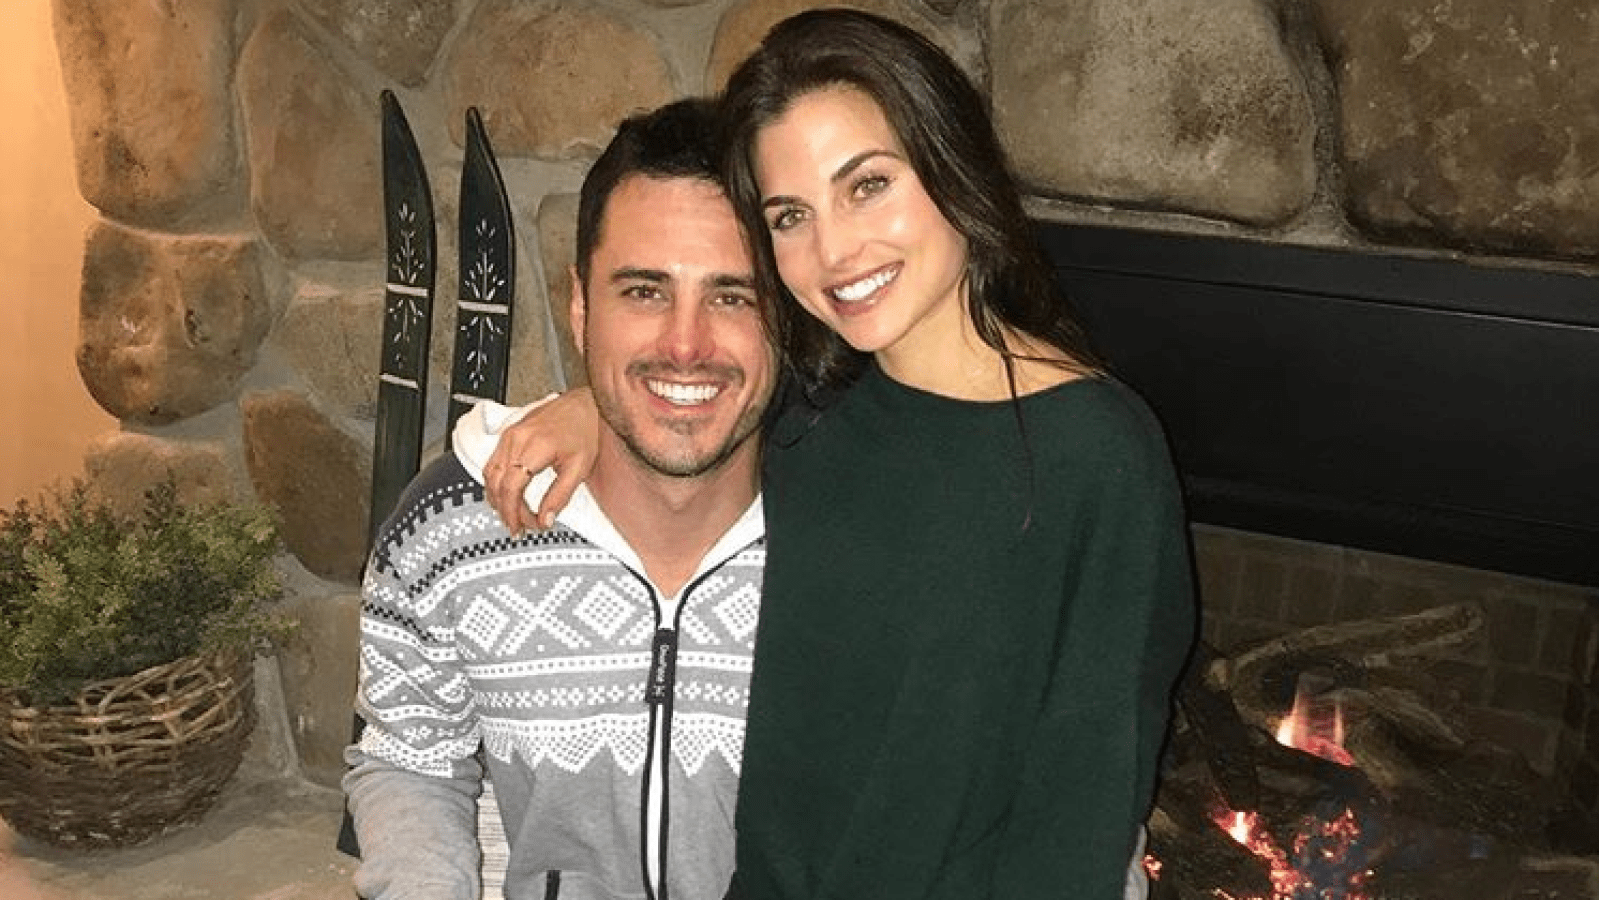 Ben Higgins’ Girlfriend Jessica Clarke Calls Him ‘My Greatest Surprise and Blessing’ in Sweet Birthday Post